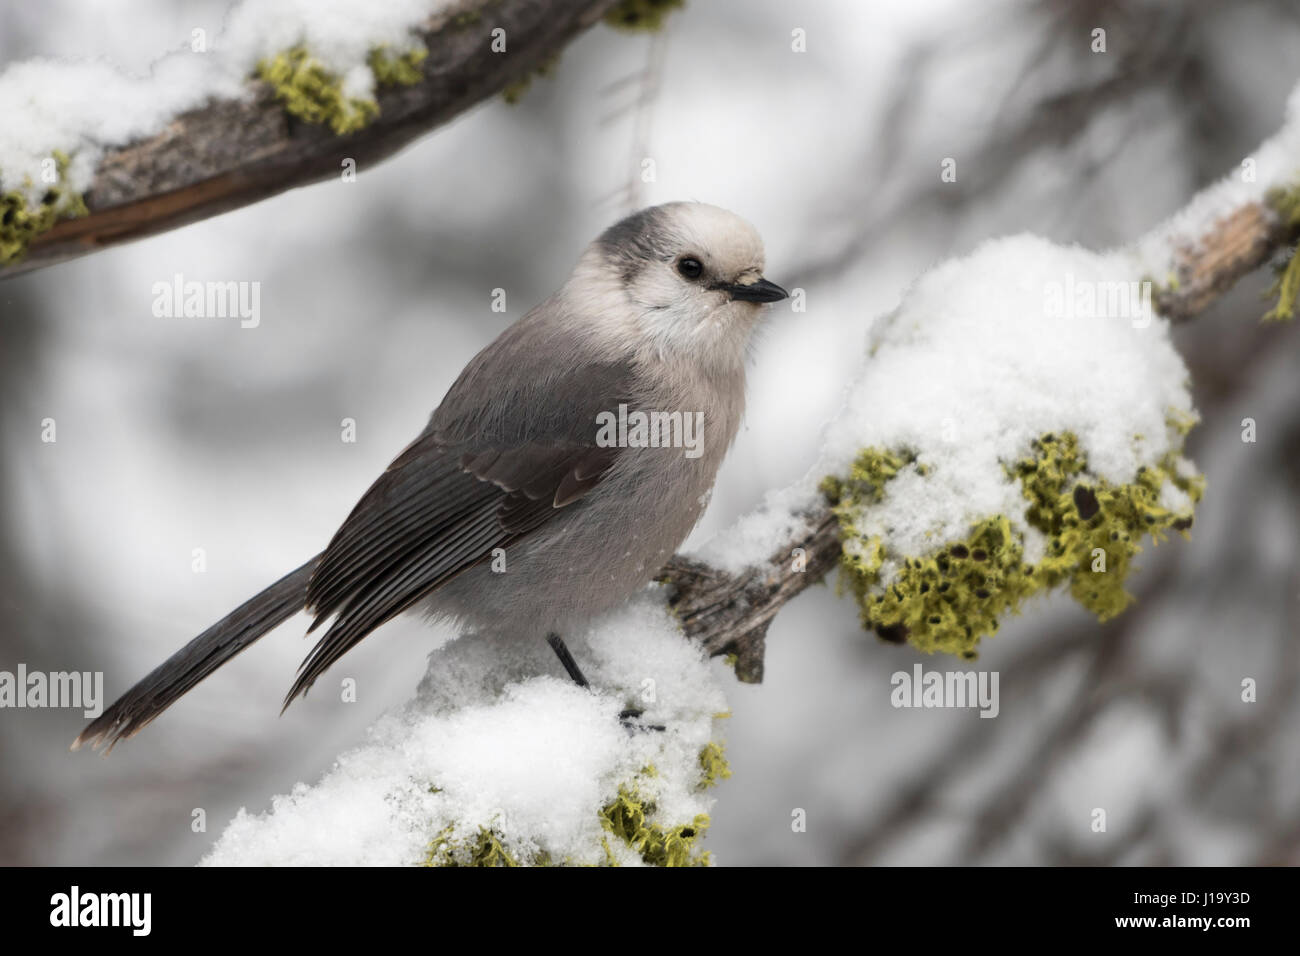 Grey jay / Meisenhaeher ( Perisoreus canadensis ) in winter, perching on a snow covered branch, Yellowstone NP, Montana, USA. Stock Photo